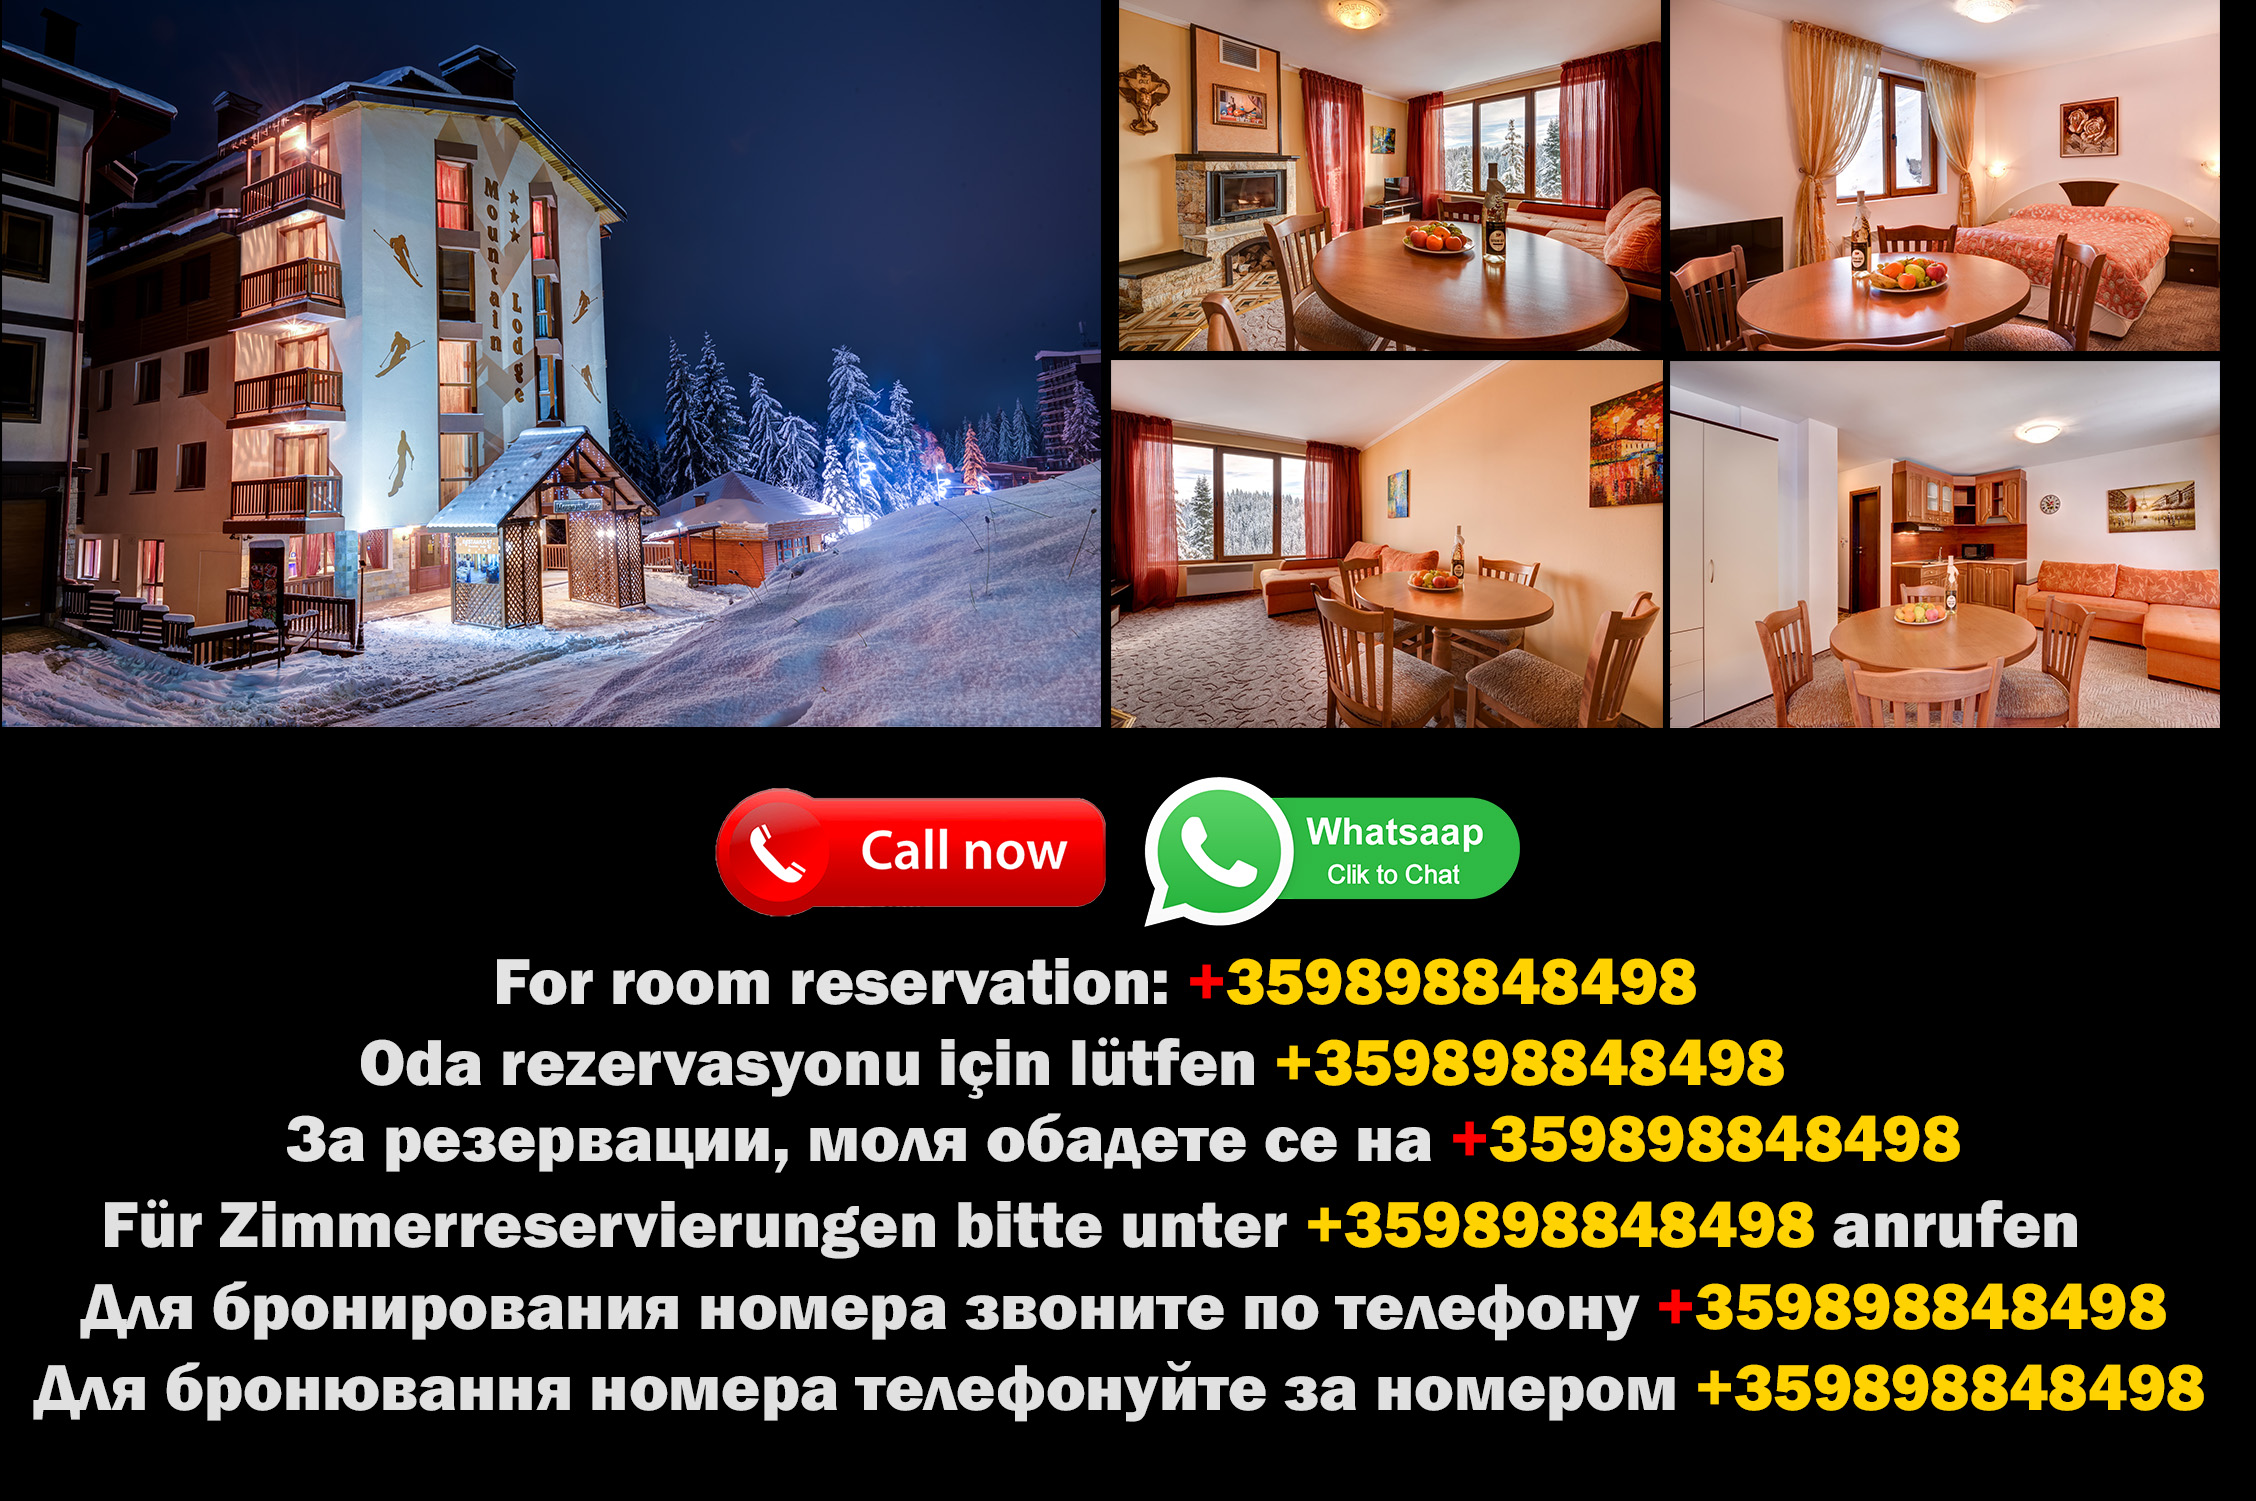 Hotels in Pamporovo Bulgarien - The Mountain Lodge